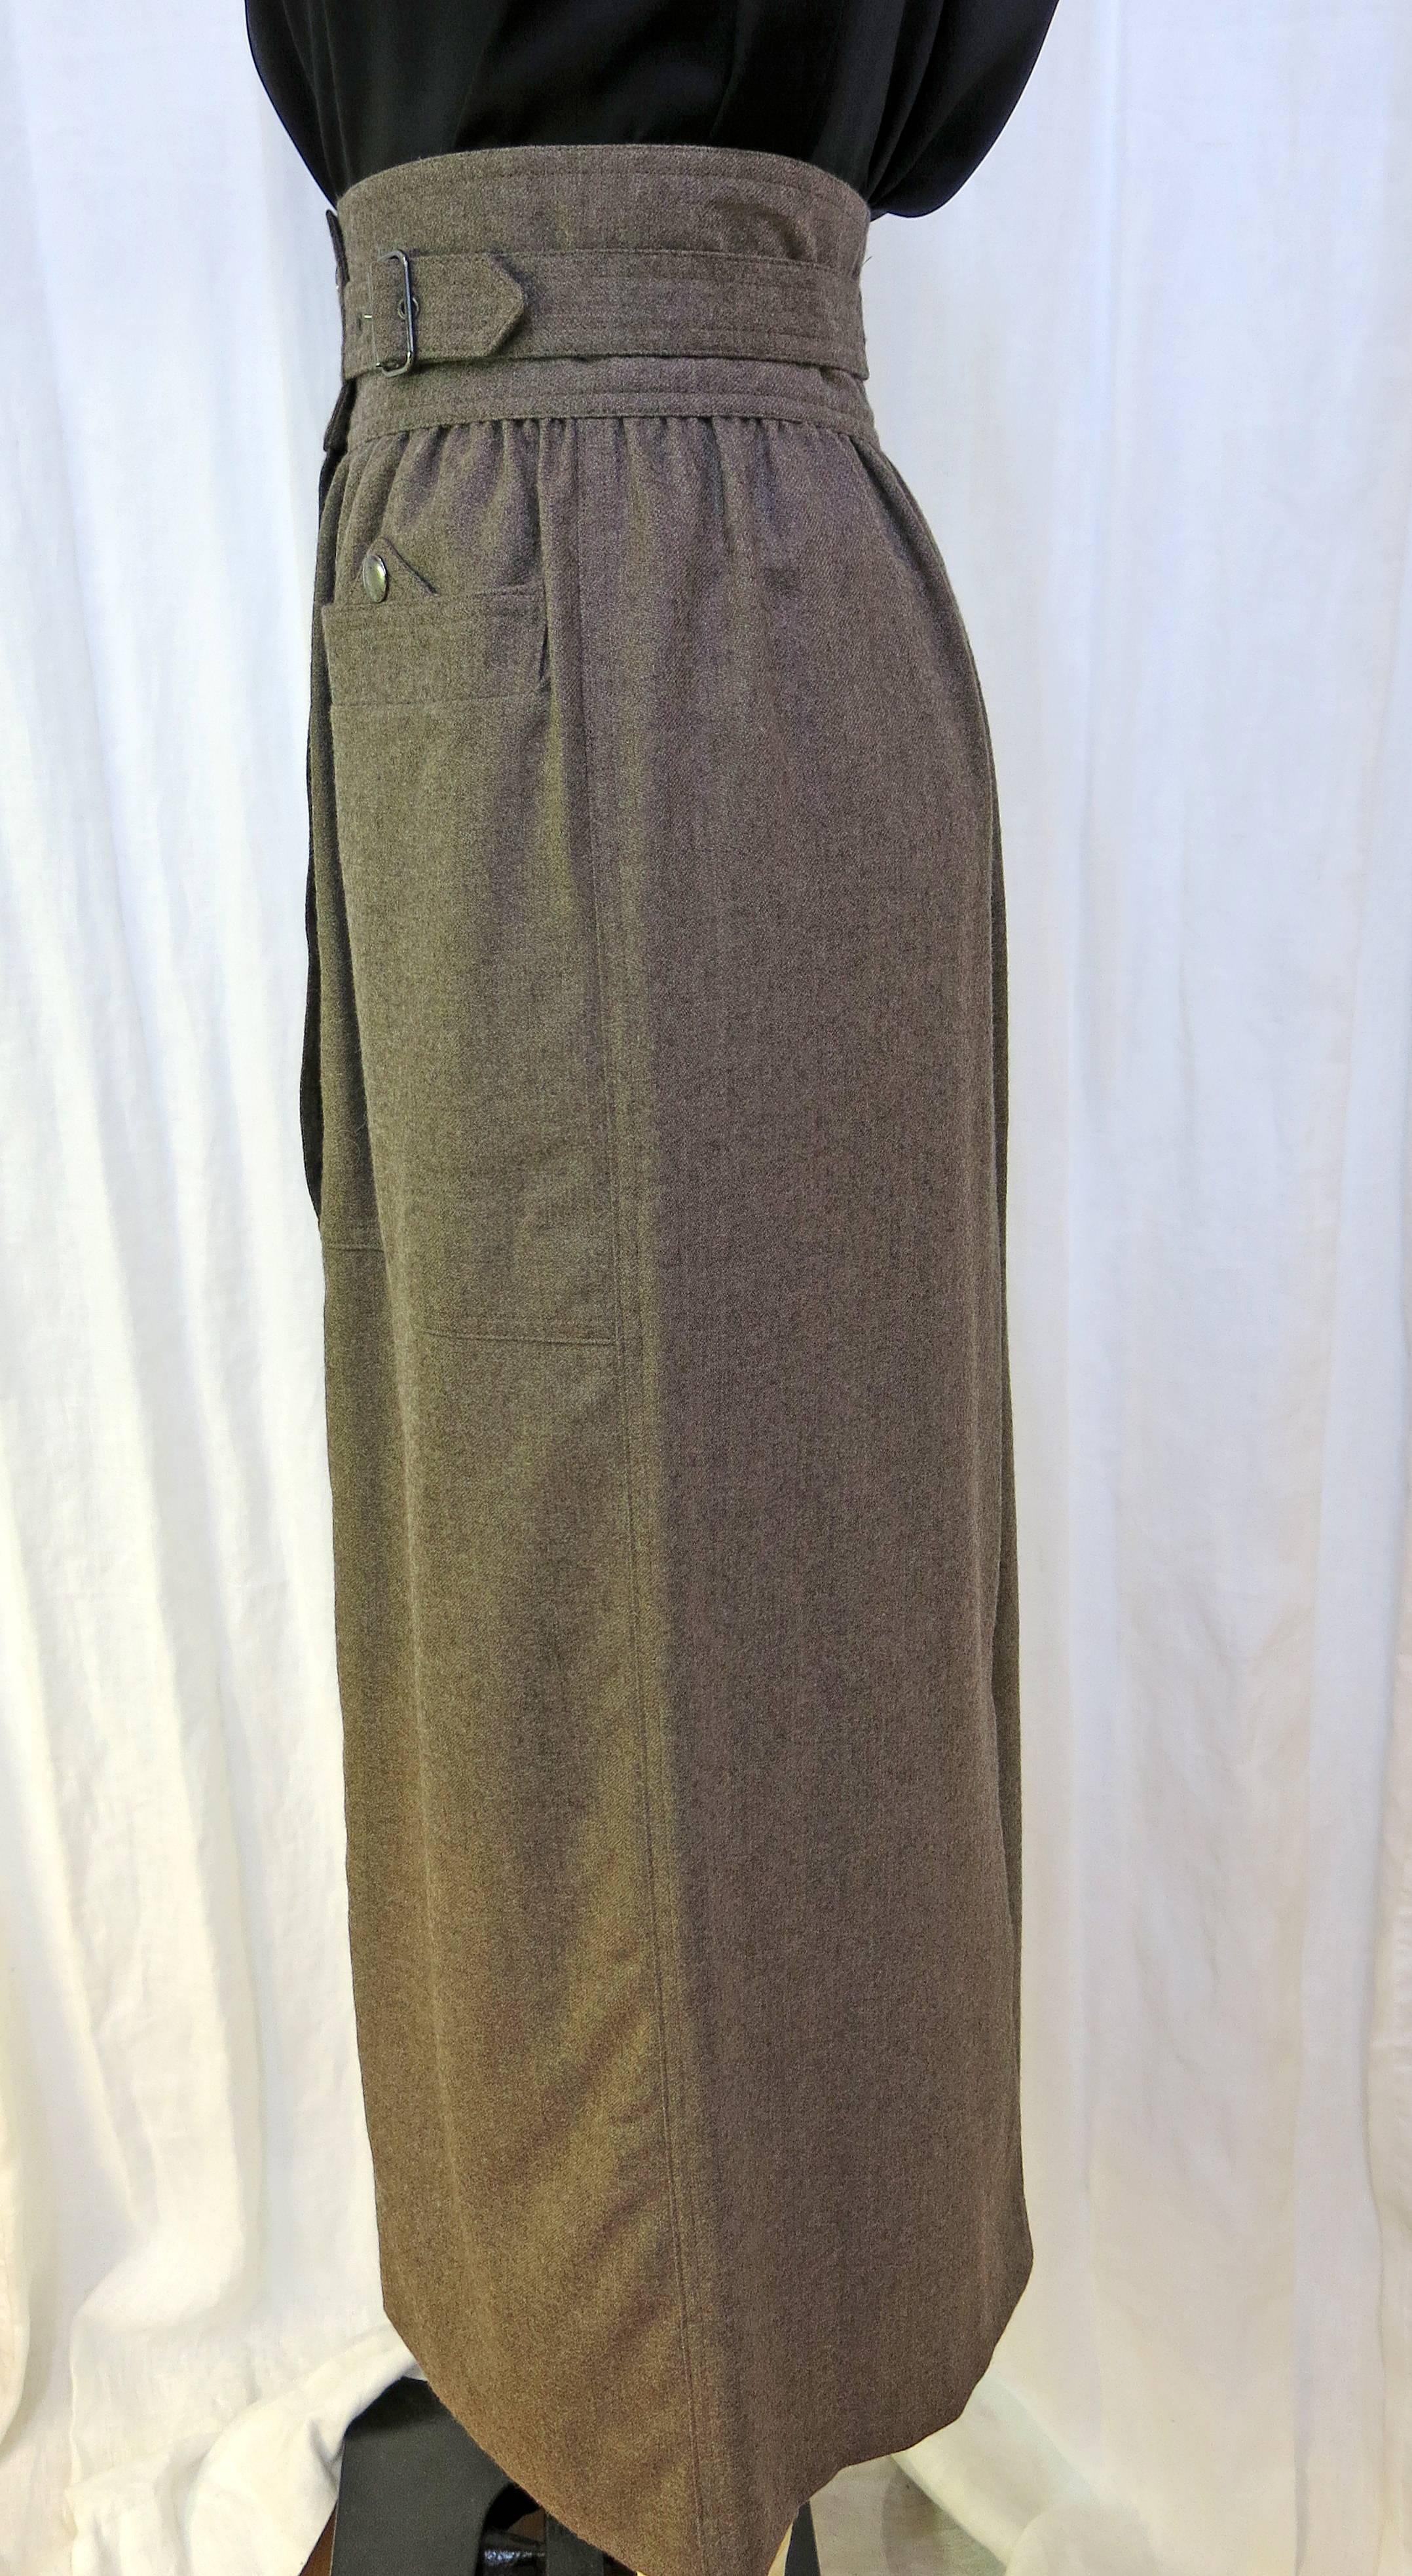 High waisted wool full length skirt. Belted at the waist with two button closure pockets at the front and one at the back of the garment. Two button closure at the waist of the skirt. Conservative slit at the back for easy movement. Unlined. Would